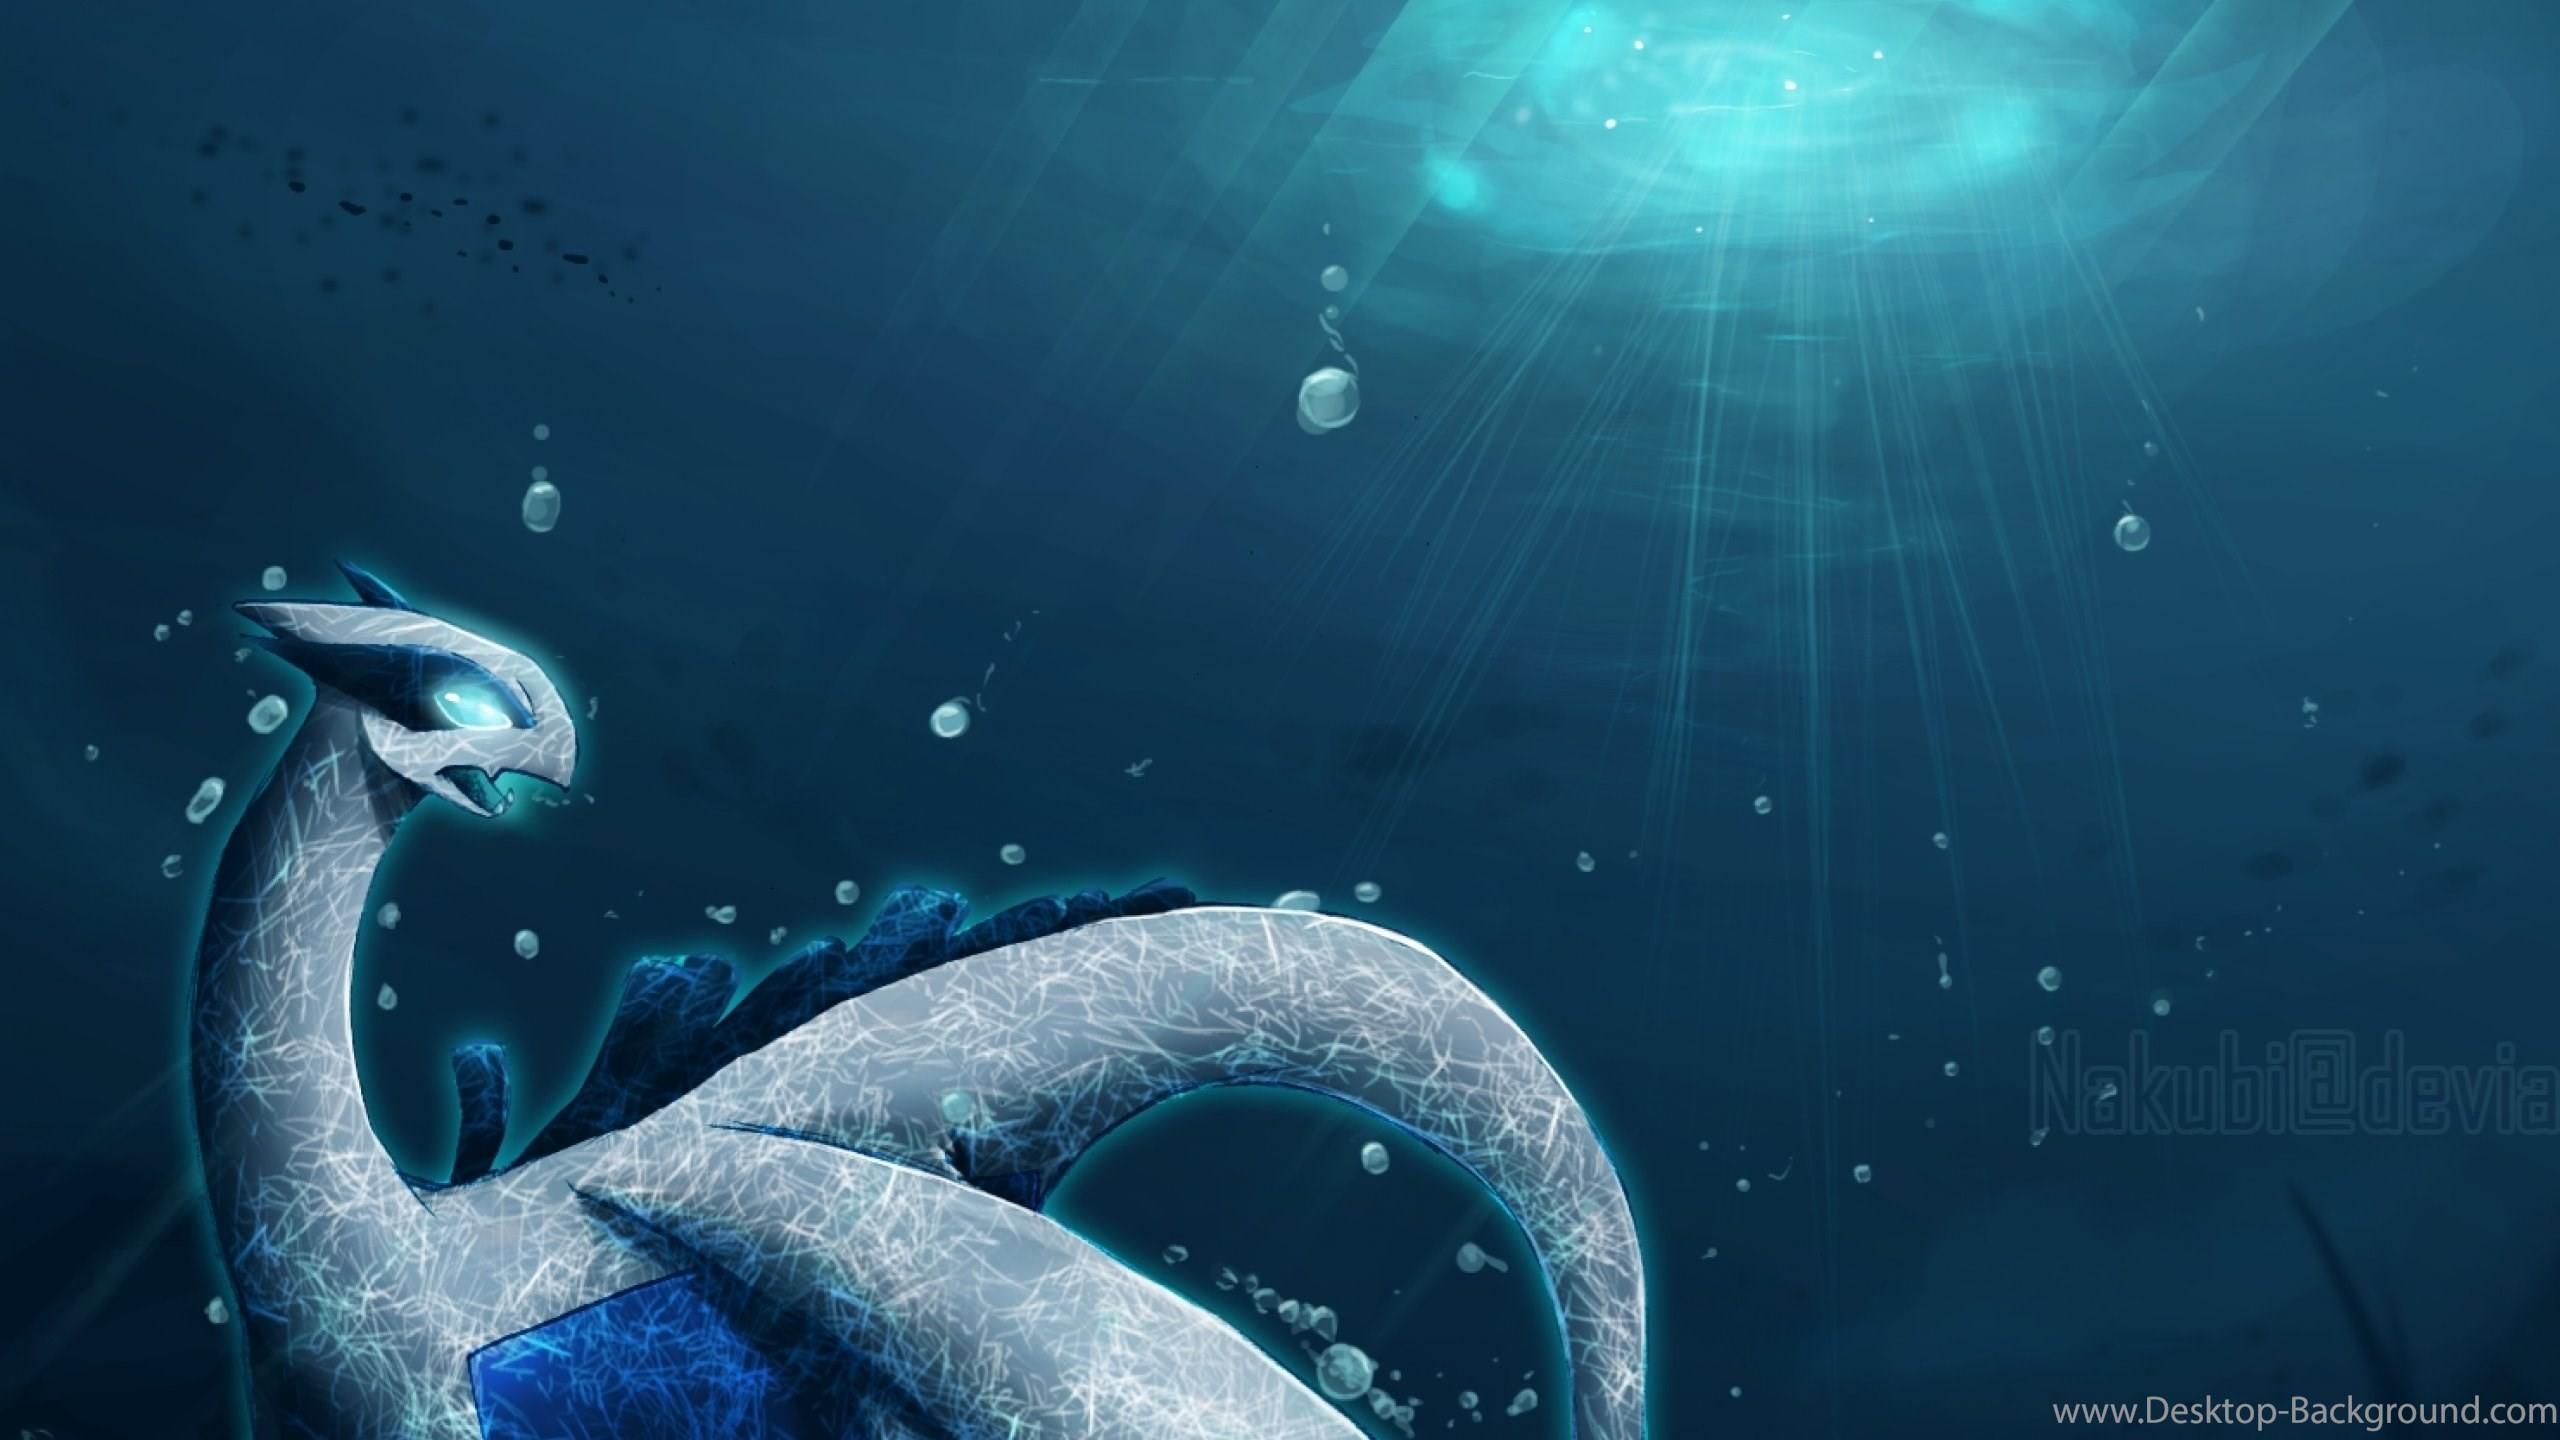 Lugia wallpaper by turbot2 - Download on ZEDGE™